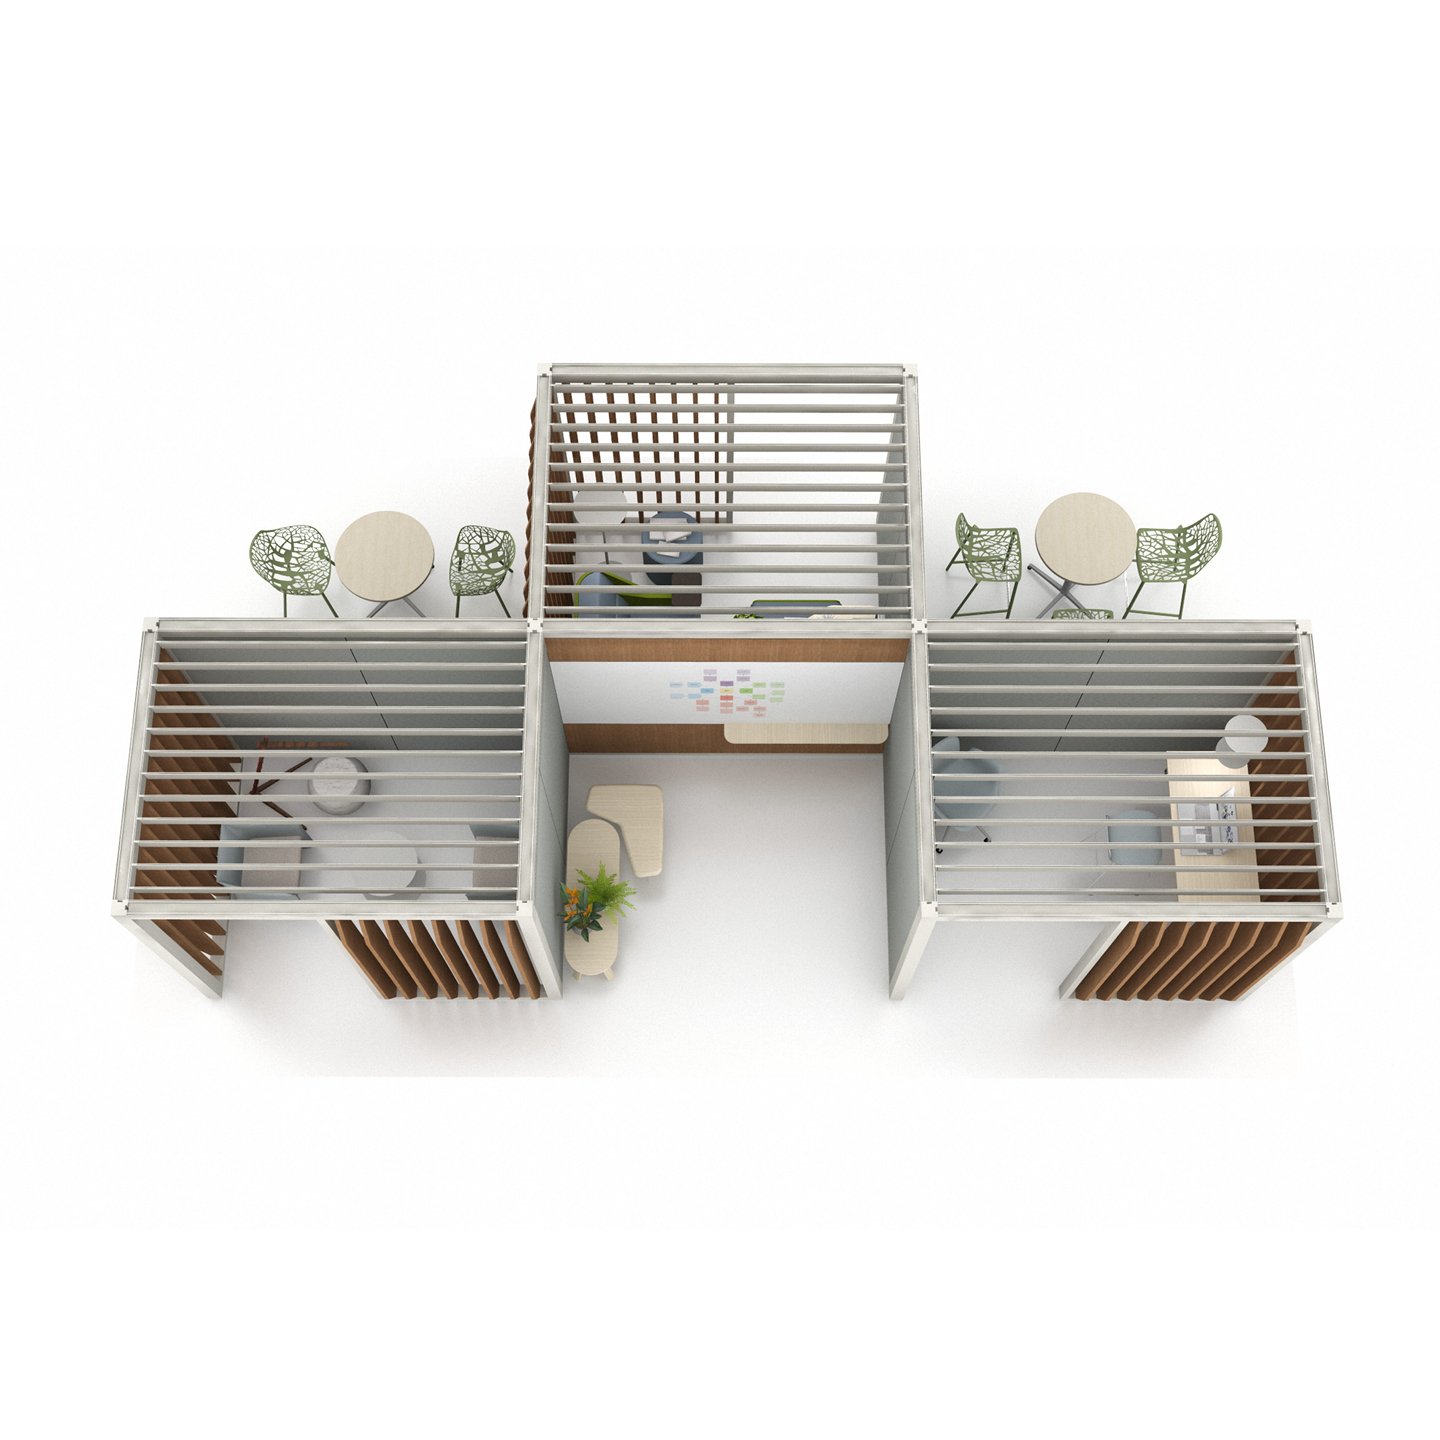 Haworth Pergola Workspace in white trim and veneer slits combined with different styles with a desk, a collaboration area, and a private meeting space with haworth chairs